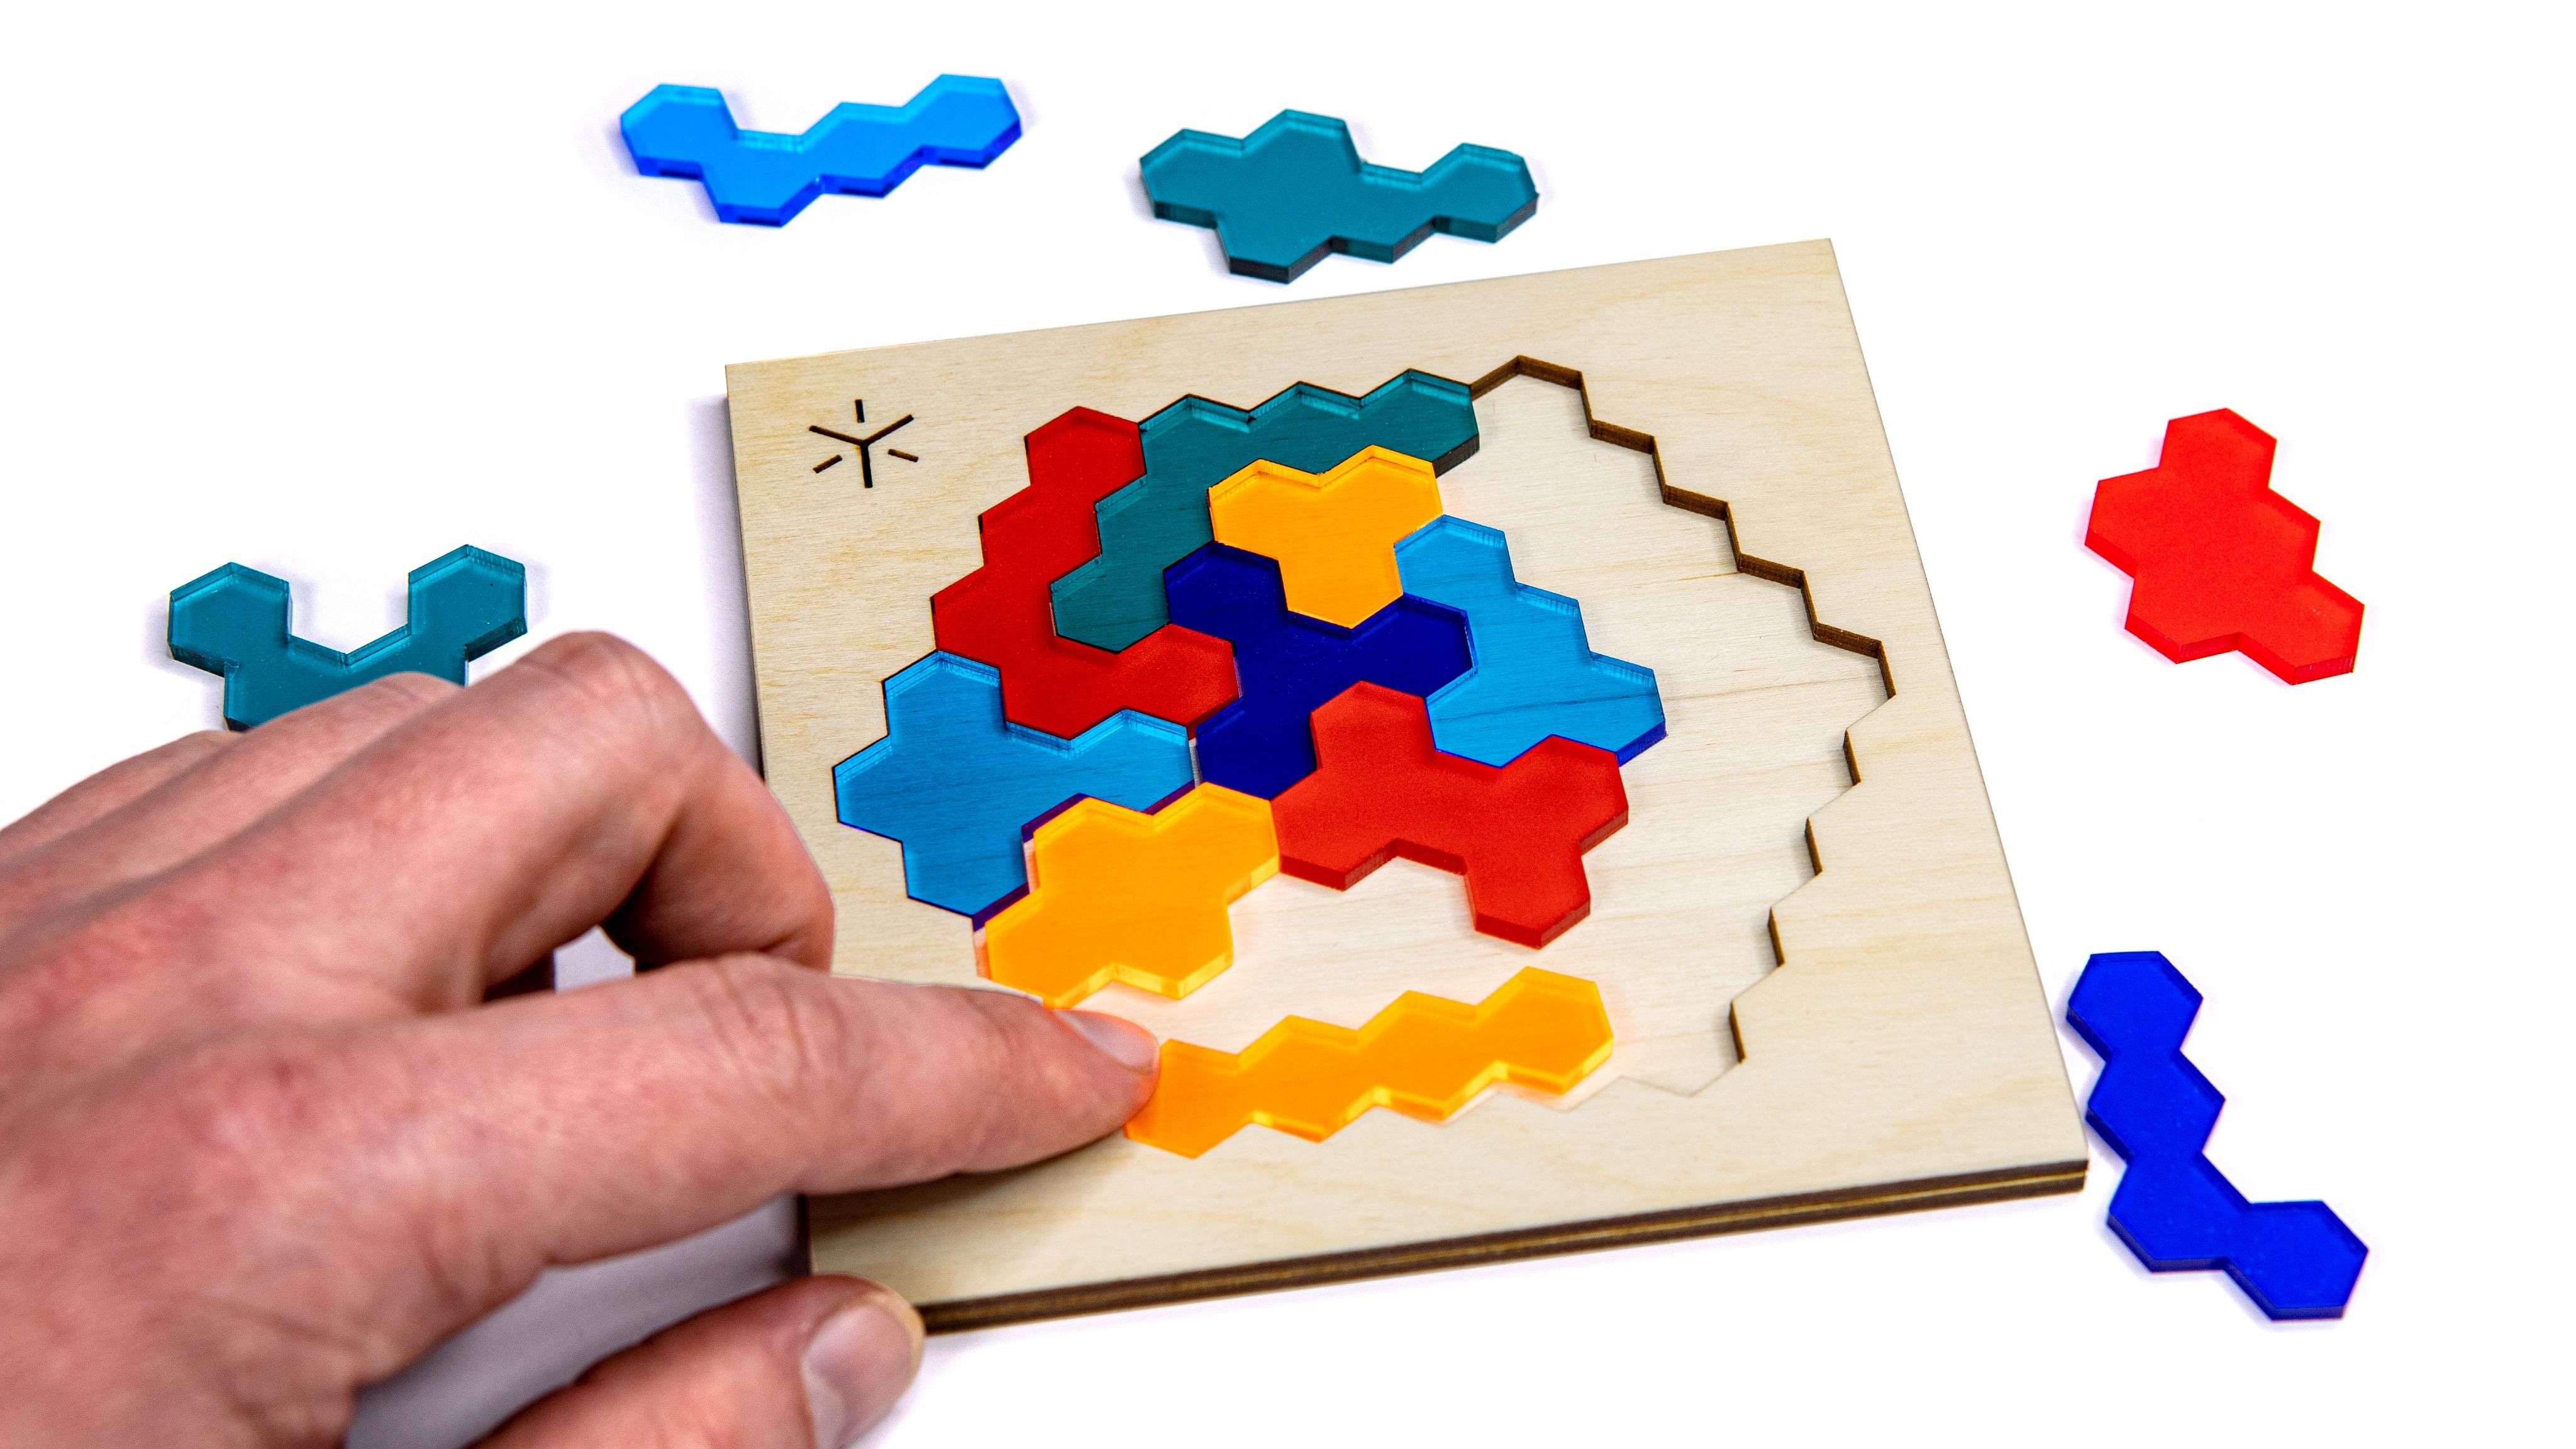 MagicNails - A Fun Puzzle Activity for Teams - From Metalog Tools USA